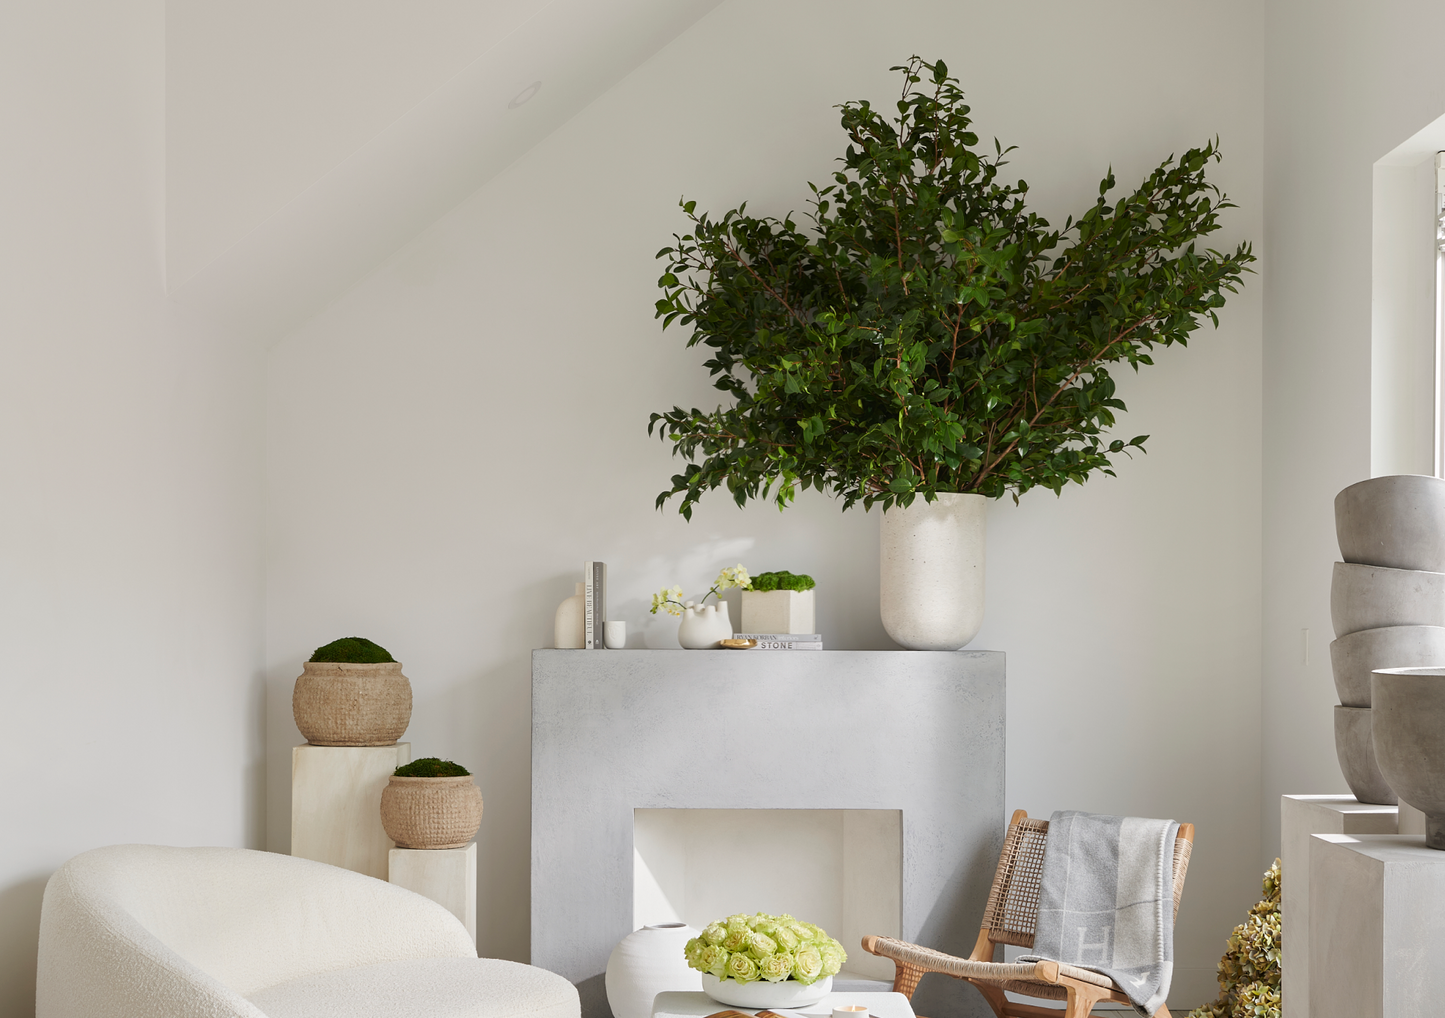 Luxurious faux interior plant displayed on the mantel in a luxury displayed setting.